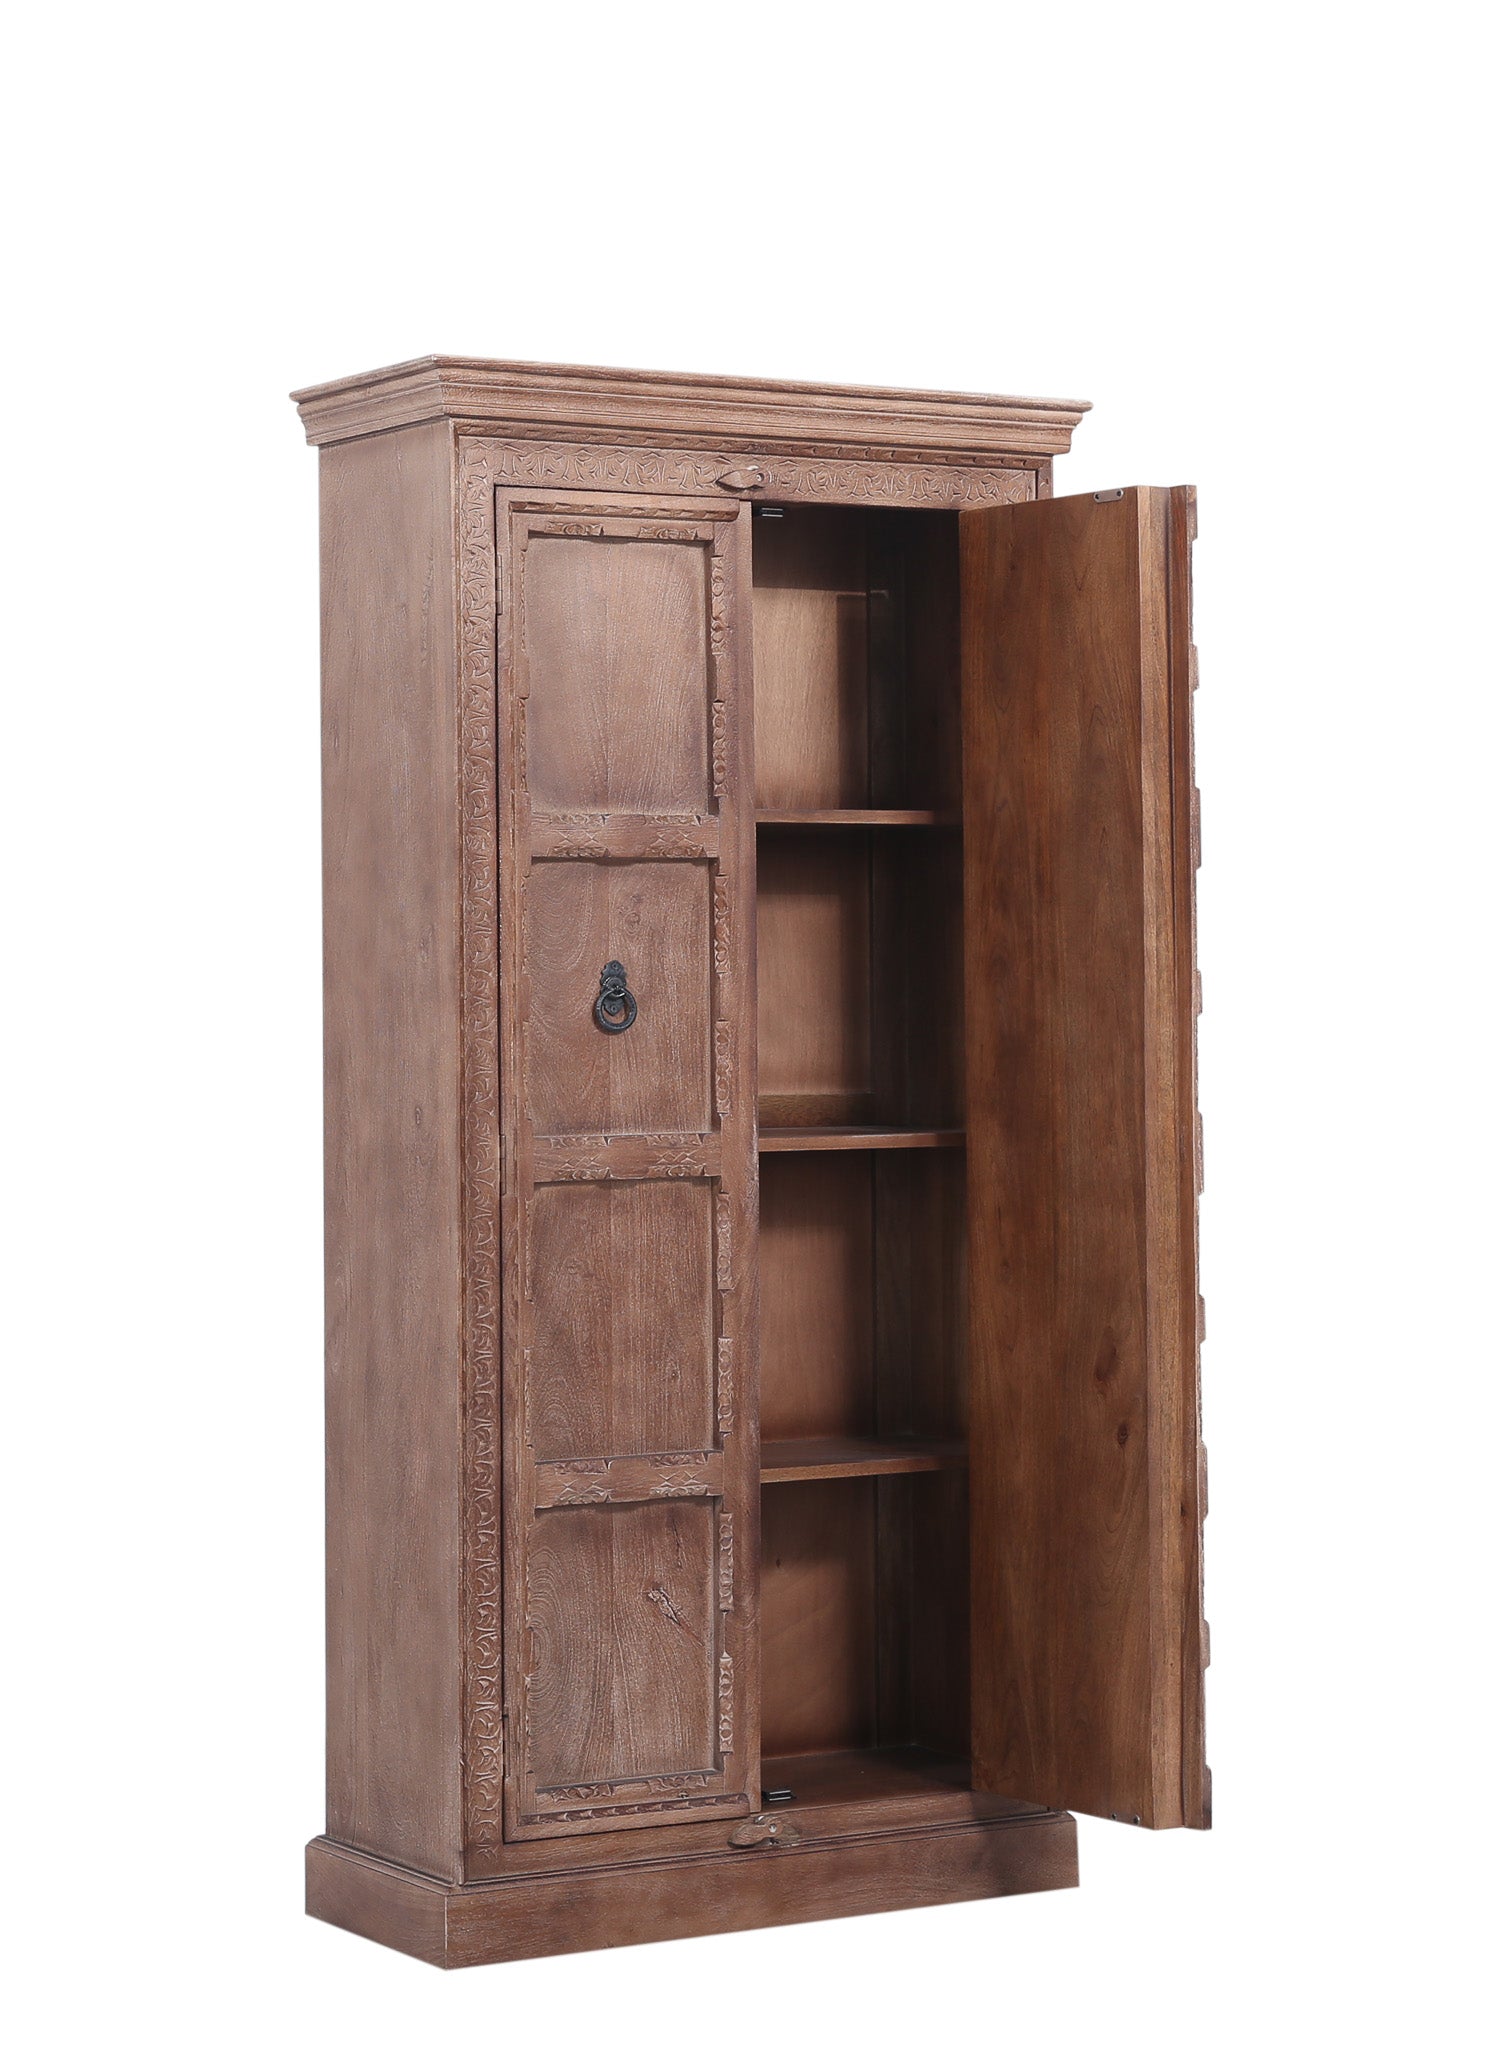 Mahala Nomad Wooden Cabinet in Distressed Brown Finish in Cabinets by VMInnovations